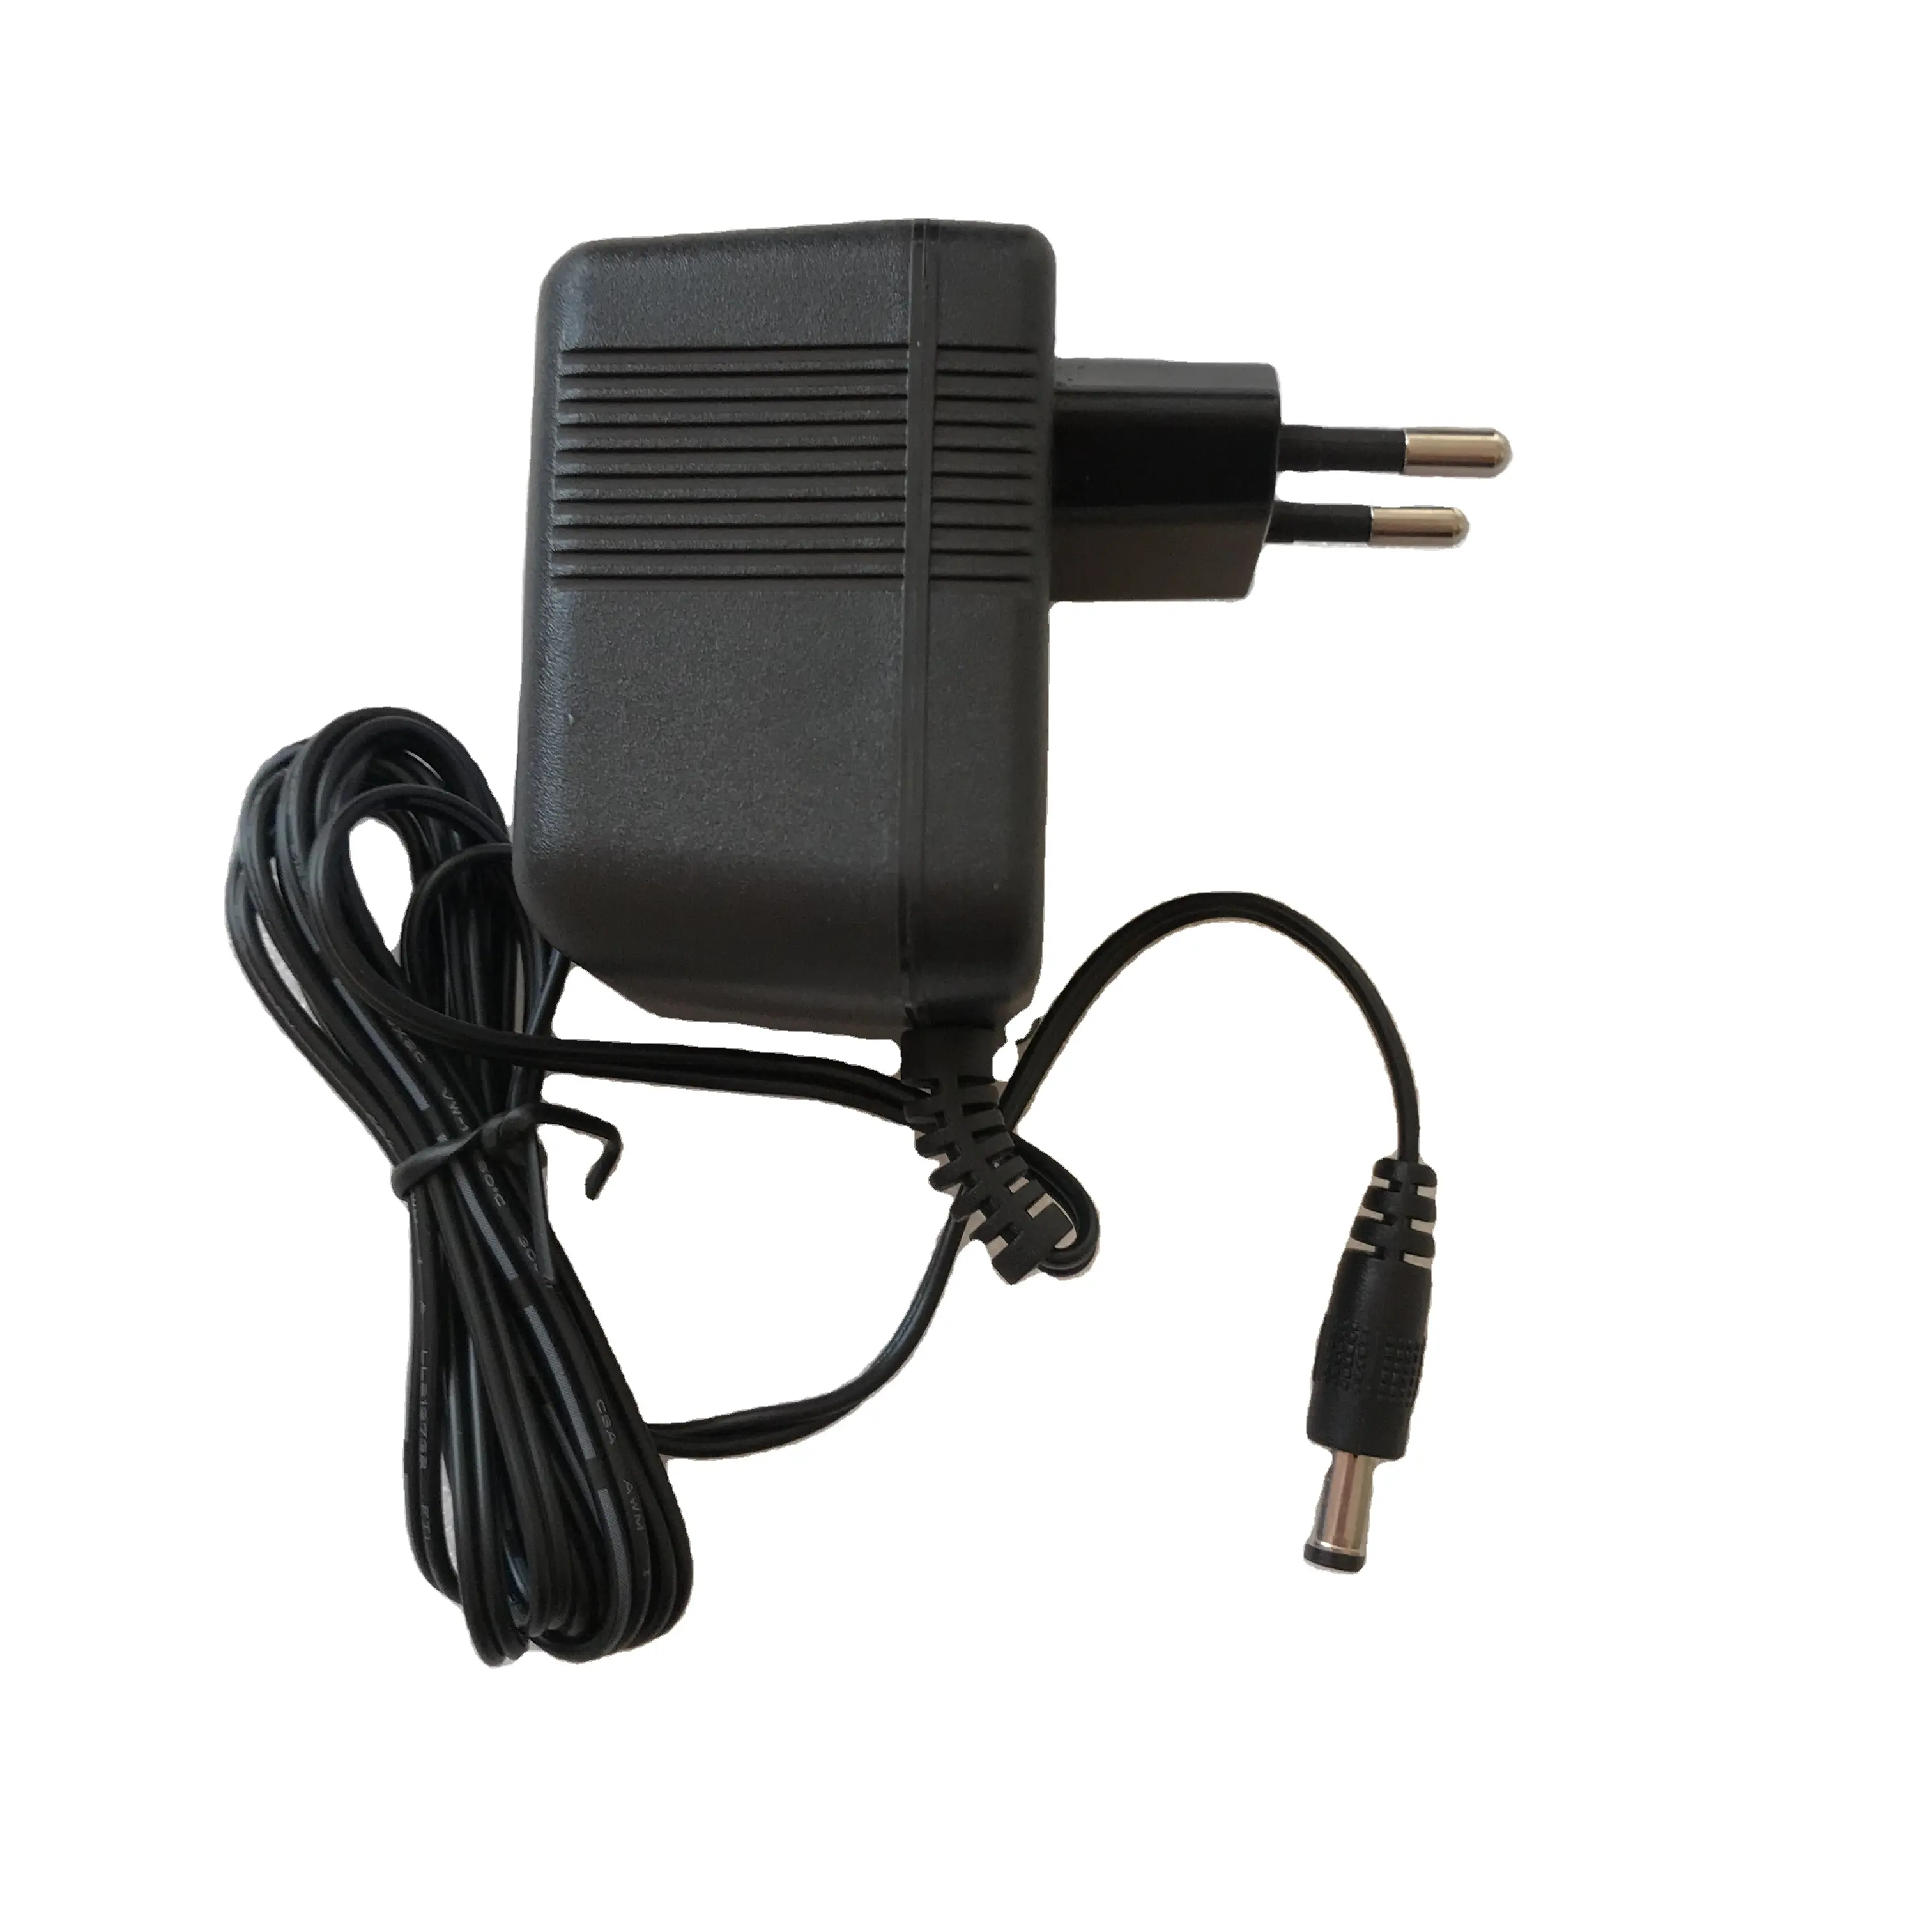 Ac Adapter Class 2 230VAC 24vac 300ma power supply transformer with safety certificates